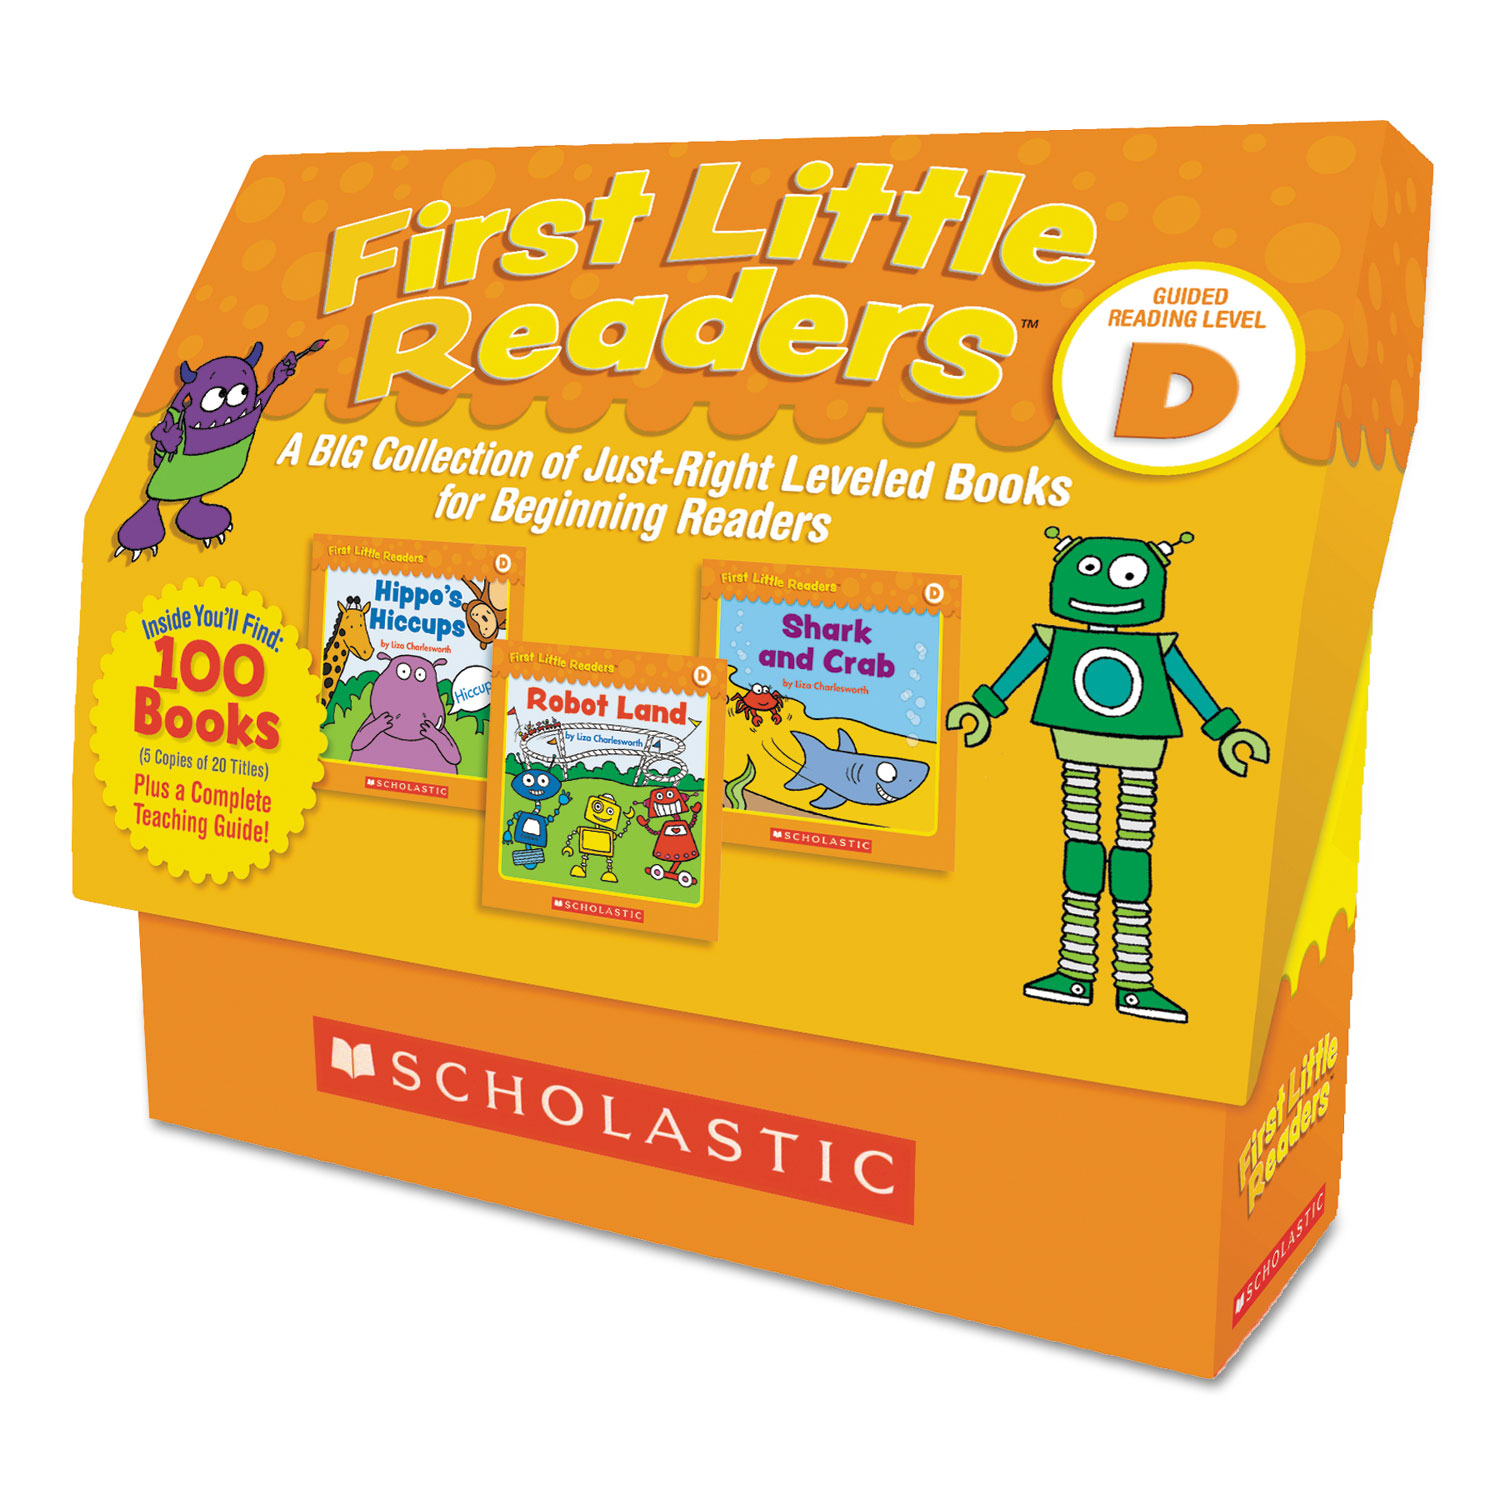  Scholastic 9781338111460 First Little Readers, Reading, Grades Pre K-2, 8 Pages/Book, 5 Books, Level D (SHS811146) 